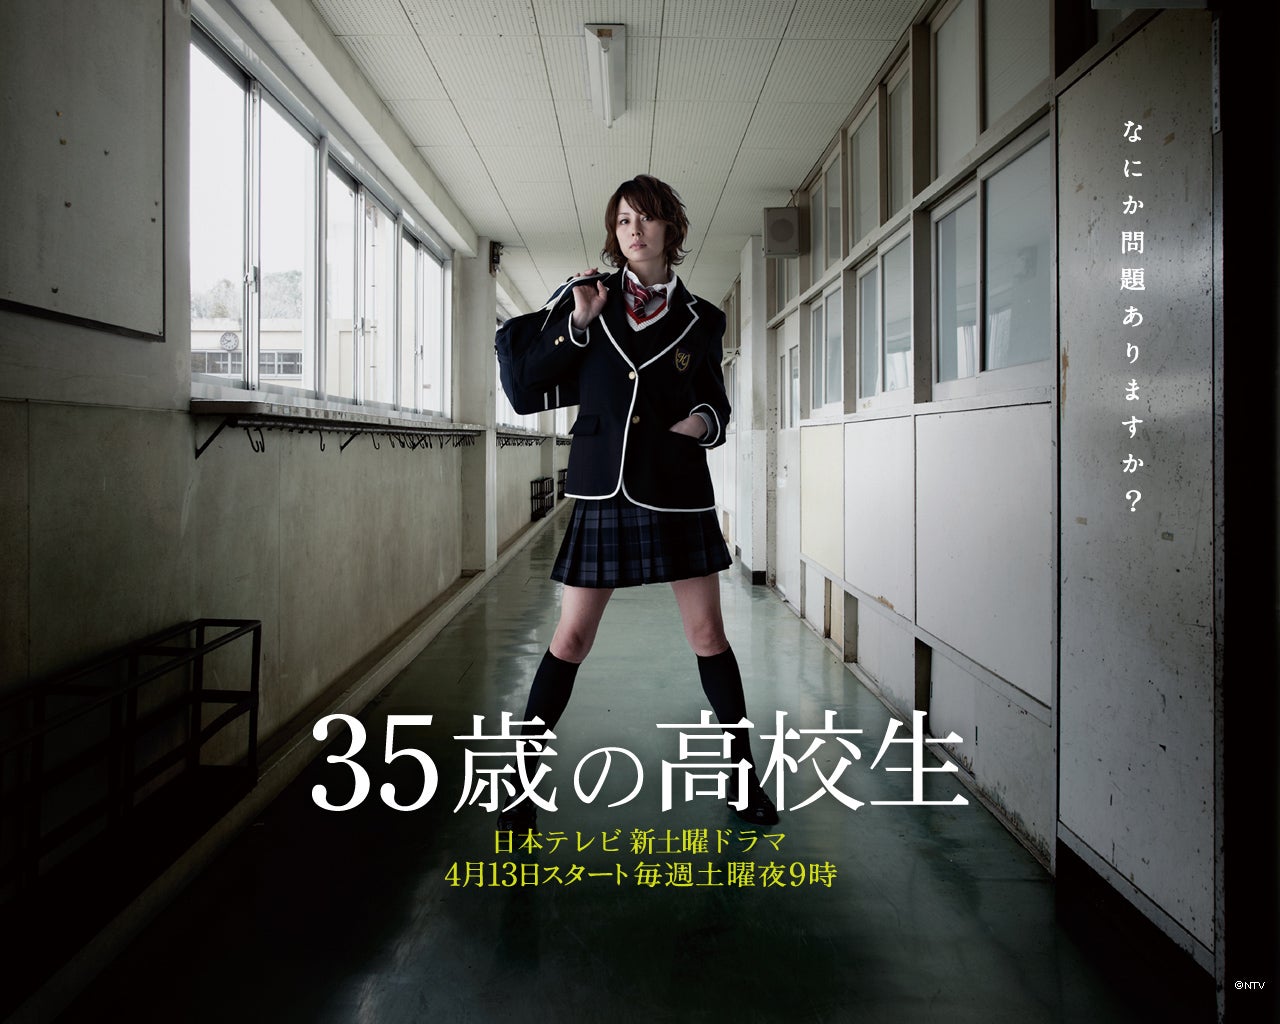 TV ratings for The 35 Year-old High School Student (35歳の高校生) in New Zealand. NTV TV series